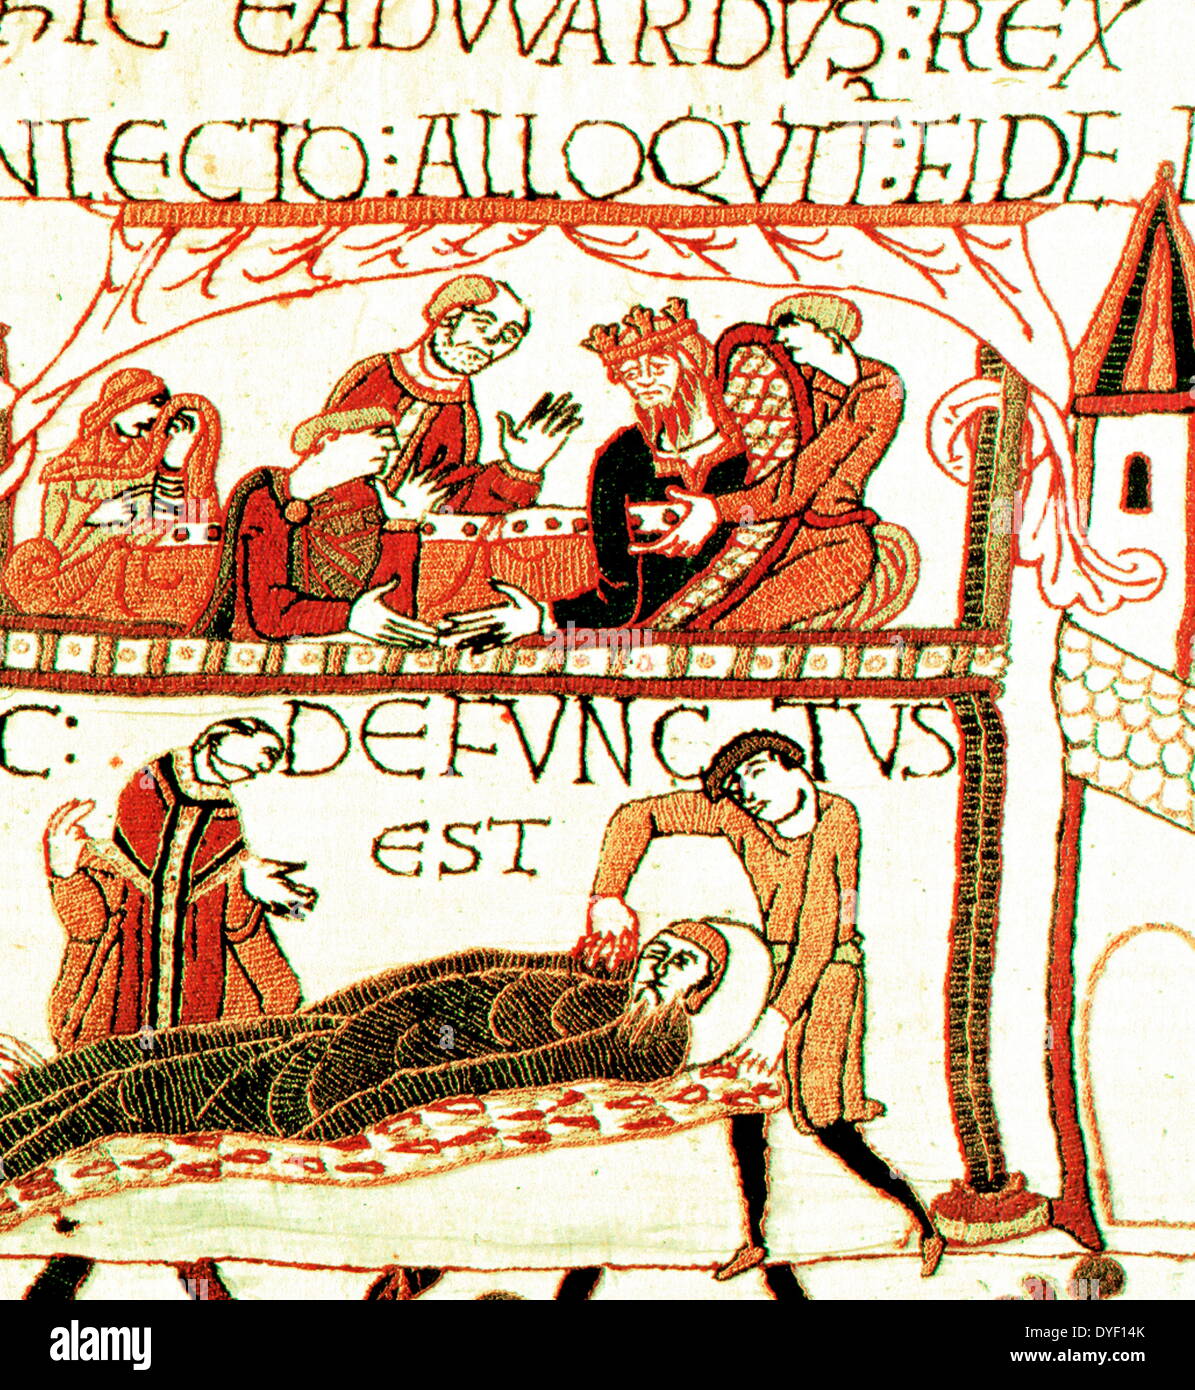 Detail from the Bayeux Tapestry depicting the events leading up to the Norman conquest of England. Specifically concerning William the Duke of Normandy and Harold, Earl of Wessex, and King of England. The events all lead up to the famous Battle of Hastings. It is not an actual tapestry, more an embroidered cloth that is almost 70 metres in length. It features fifty scenes with Latin tituli, or captions, and is thought to have been made in England in the 1070's. Stock Photo